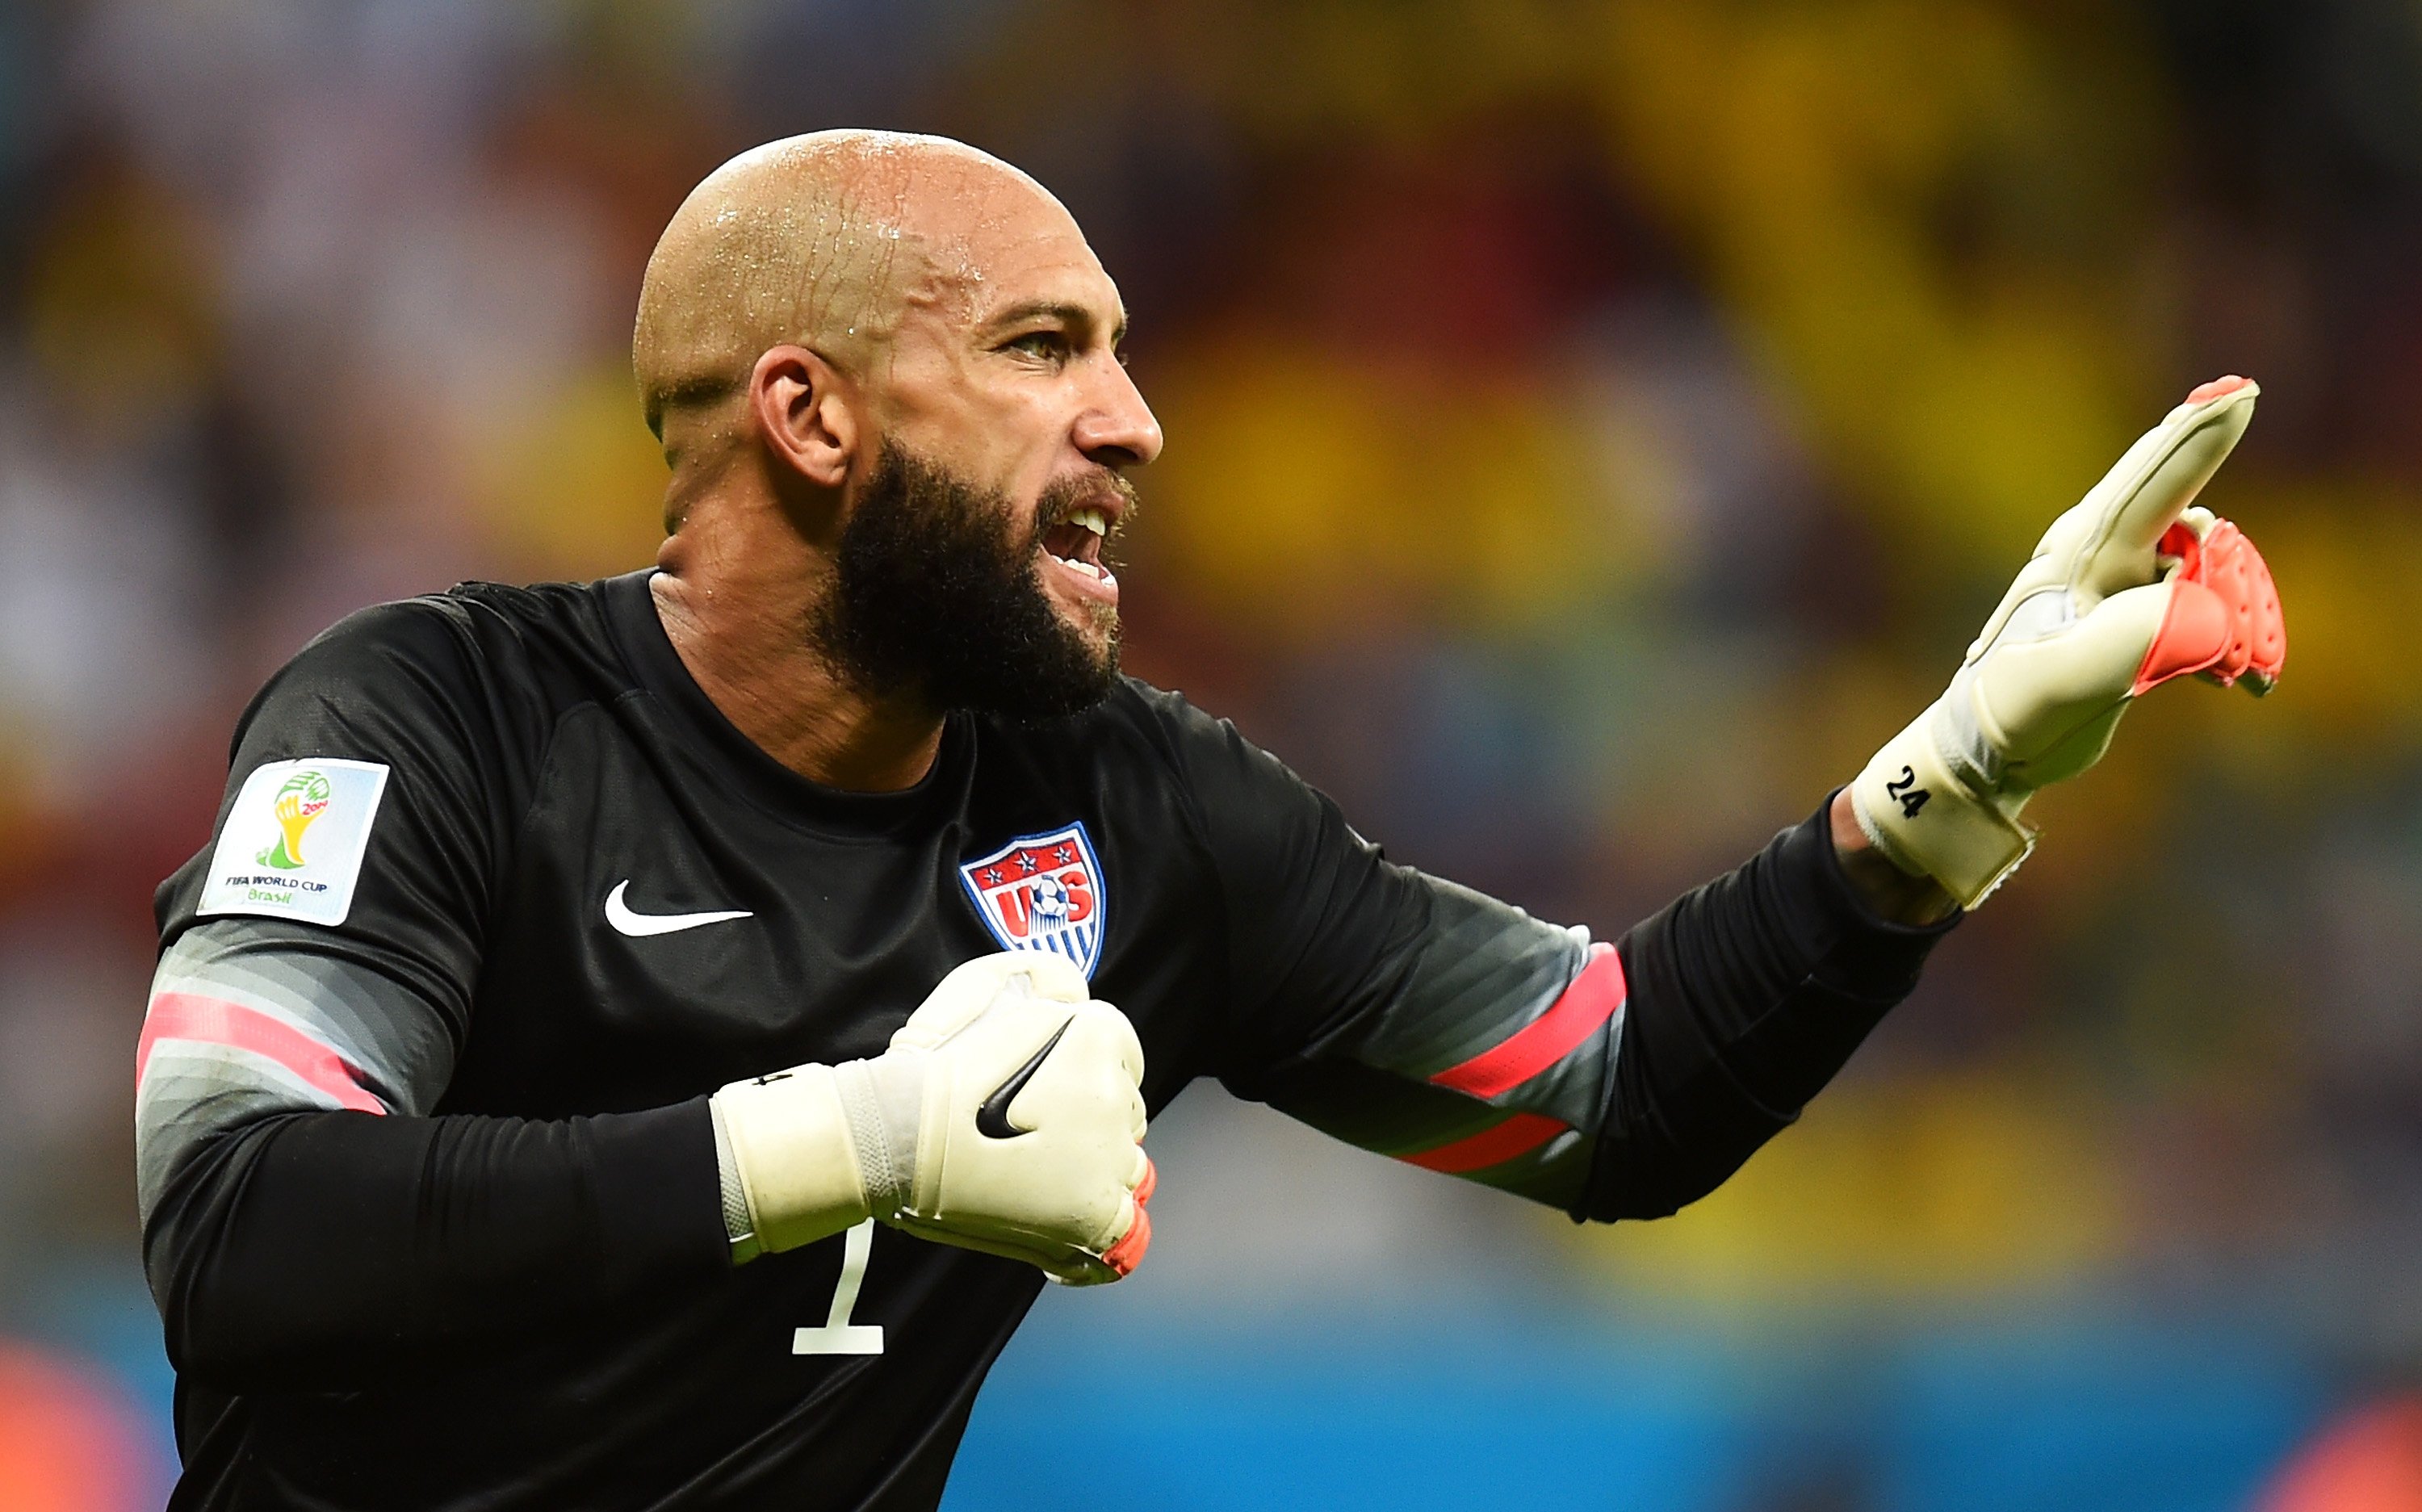 Tim Howard of the United States reacts during the match between Belgium and the United States at Arena Fonte Nova on July 1, 2014 in Salvador, Brazil.